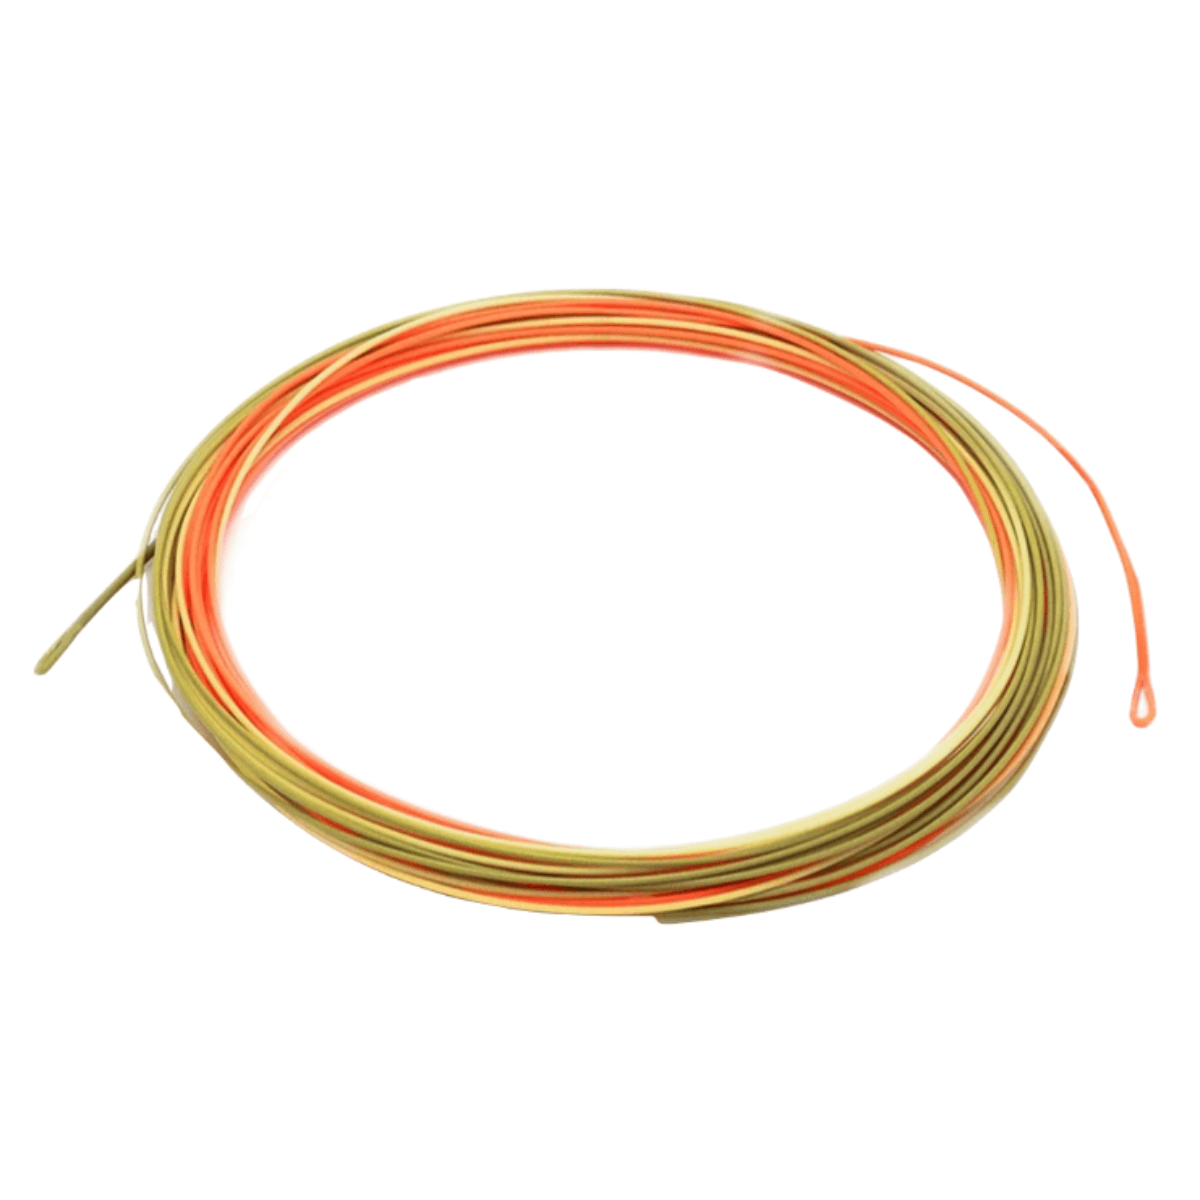 RIO Euro Nymph Shorty Fly Line, 47% OFF